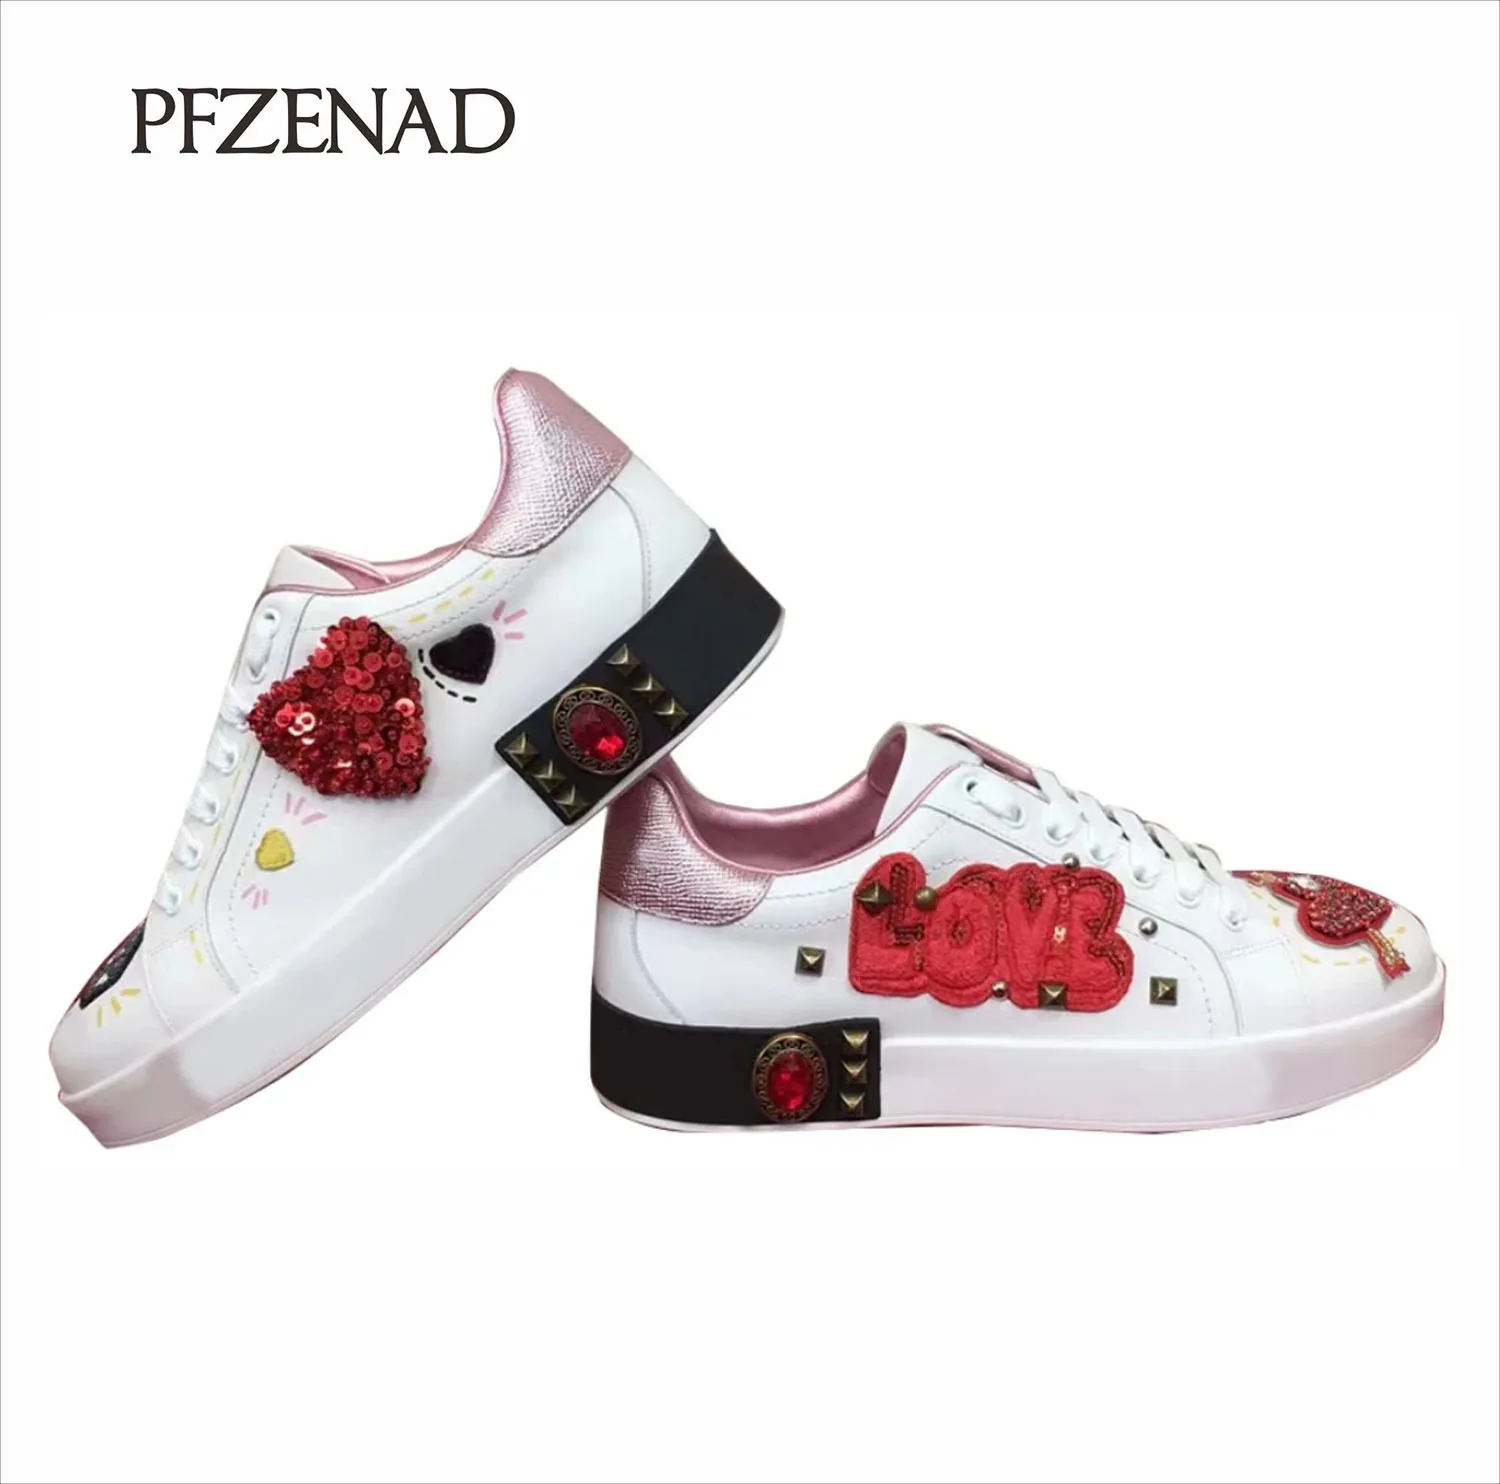 

New imported genuine leather, fashionable and exquisite craftsmanship, high-quality casual sports shoes, sizes 35-44